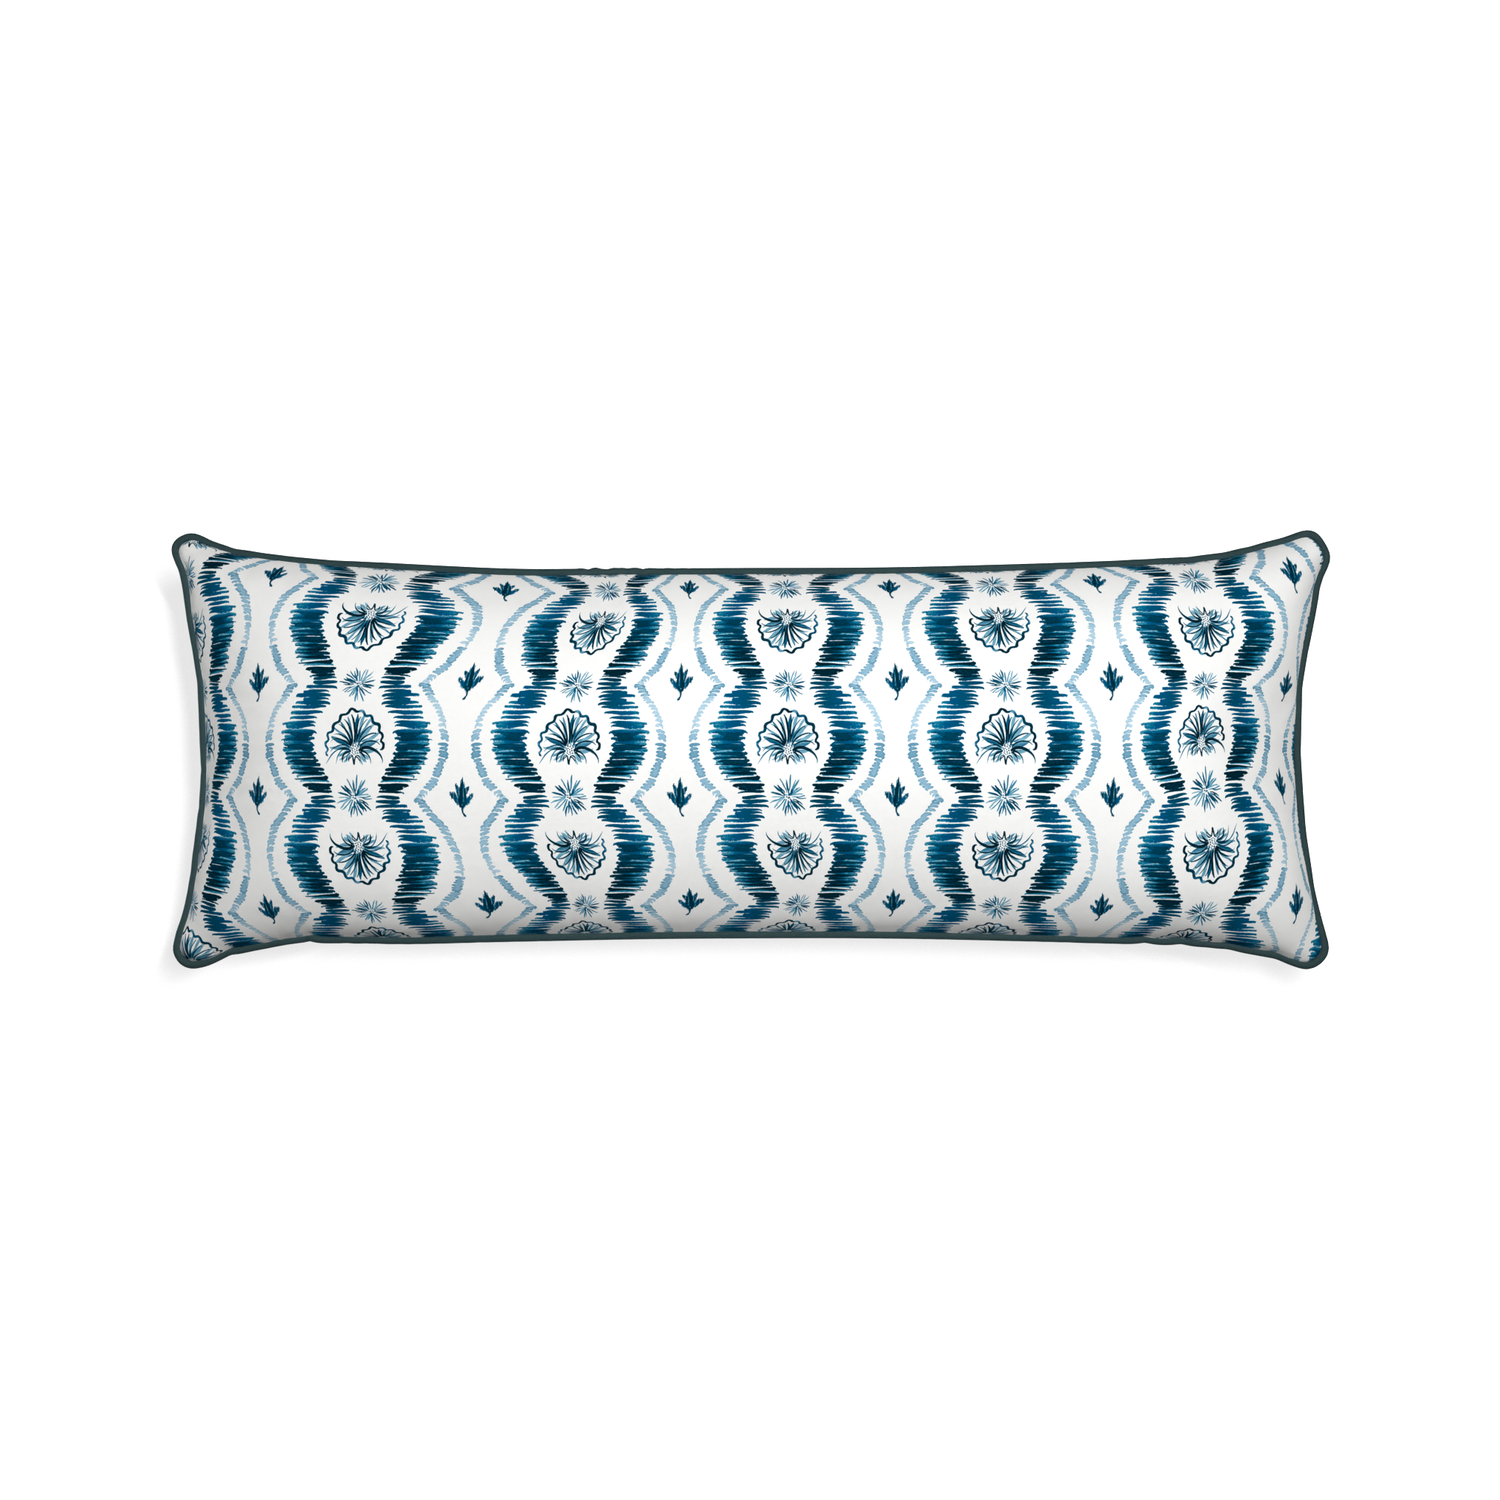 Xl-lumbar alice custom blue ikatpillow with p piping on white background